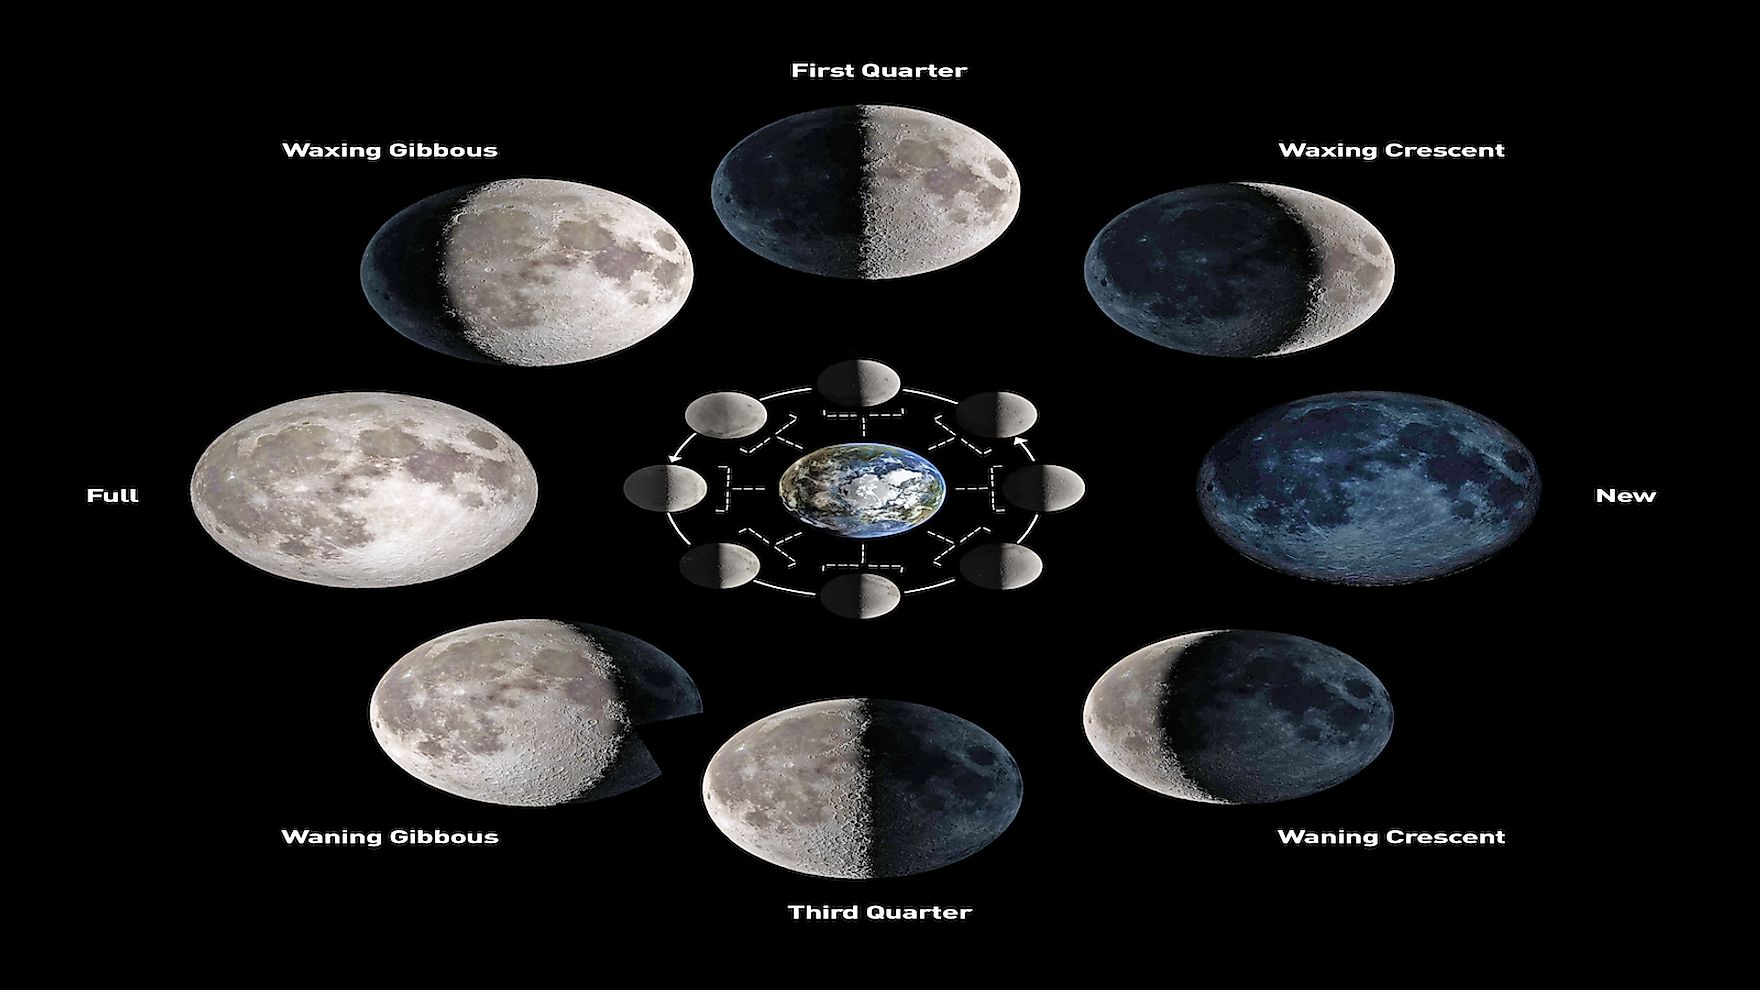 What Are The Different Phases Of The Moon? - WorldAtlas